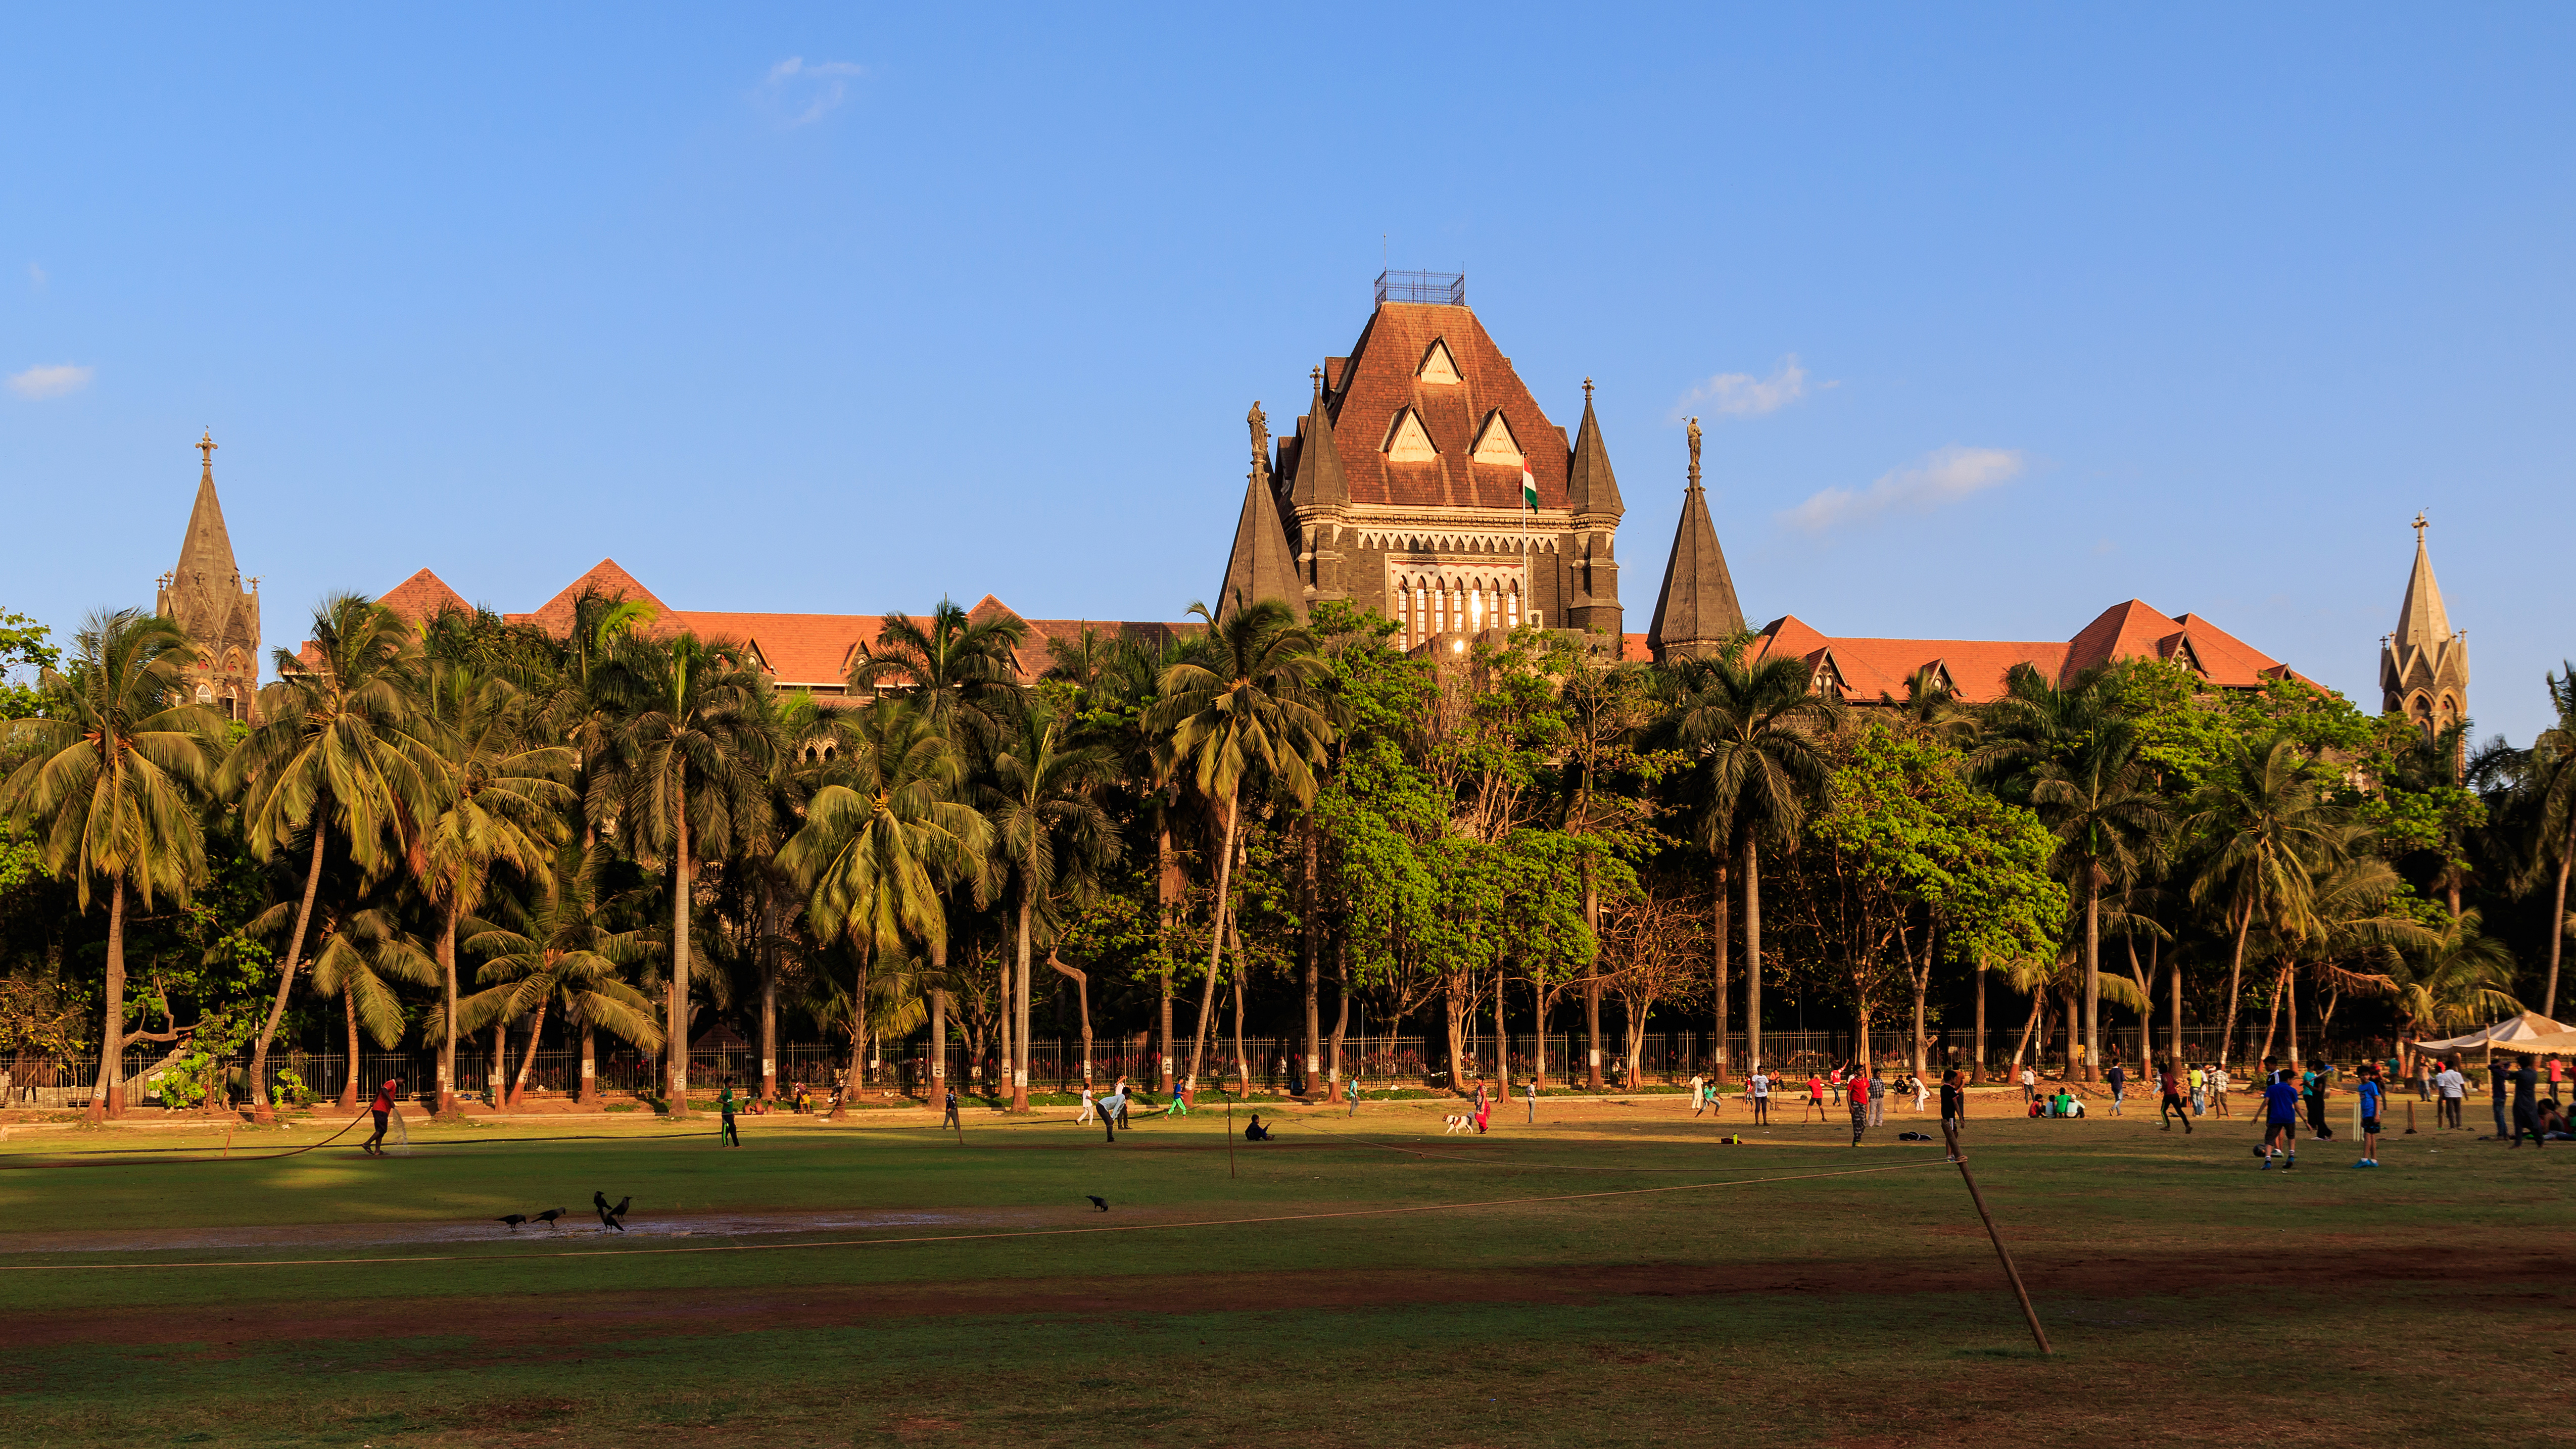 MAN ACCUSED OF MURDERING LOVERS HUSBAND, GRANTED BAIL BY BOMBAY HIGH COURT